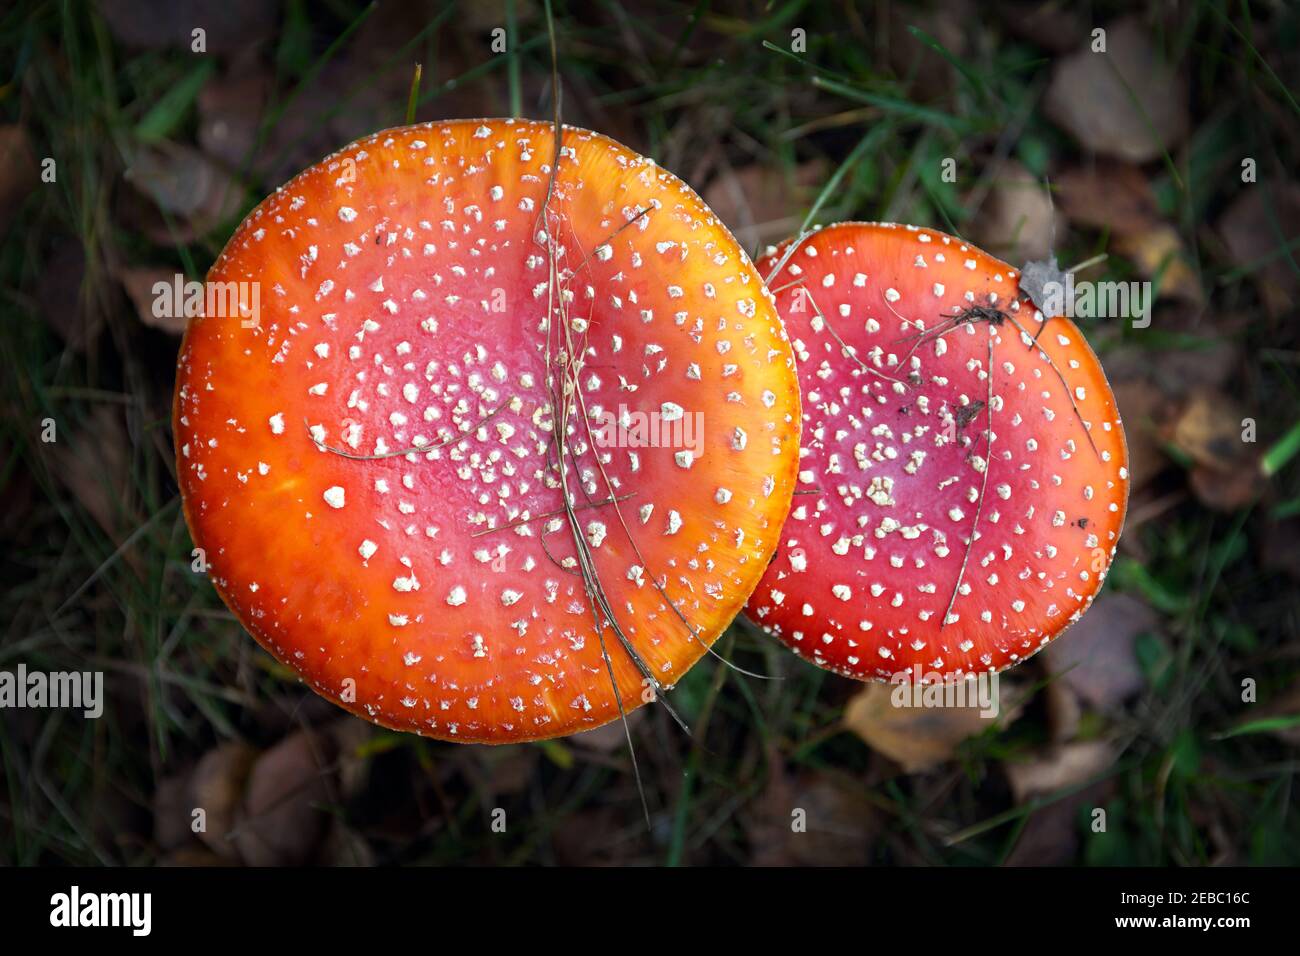 Poisonous red toadstool in the forest, Amanita Muscaria, fly agaric mushroom Stock Photo